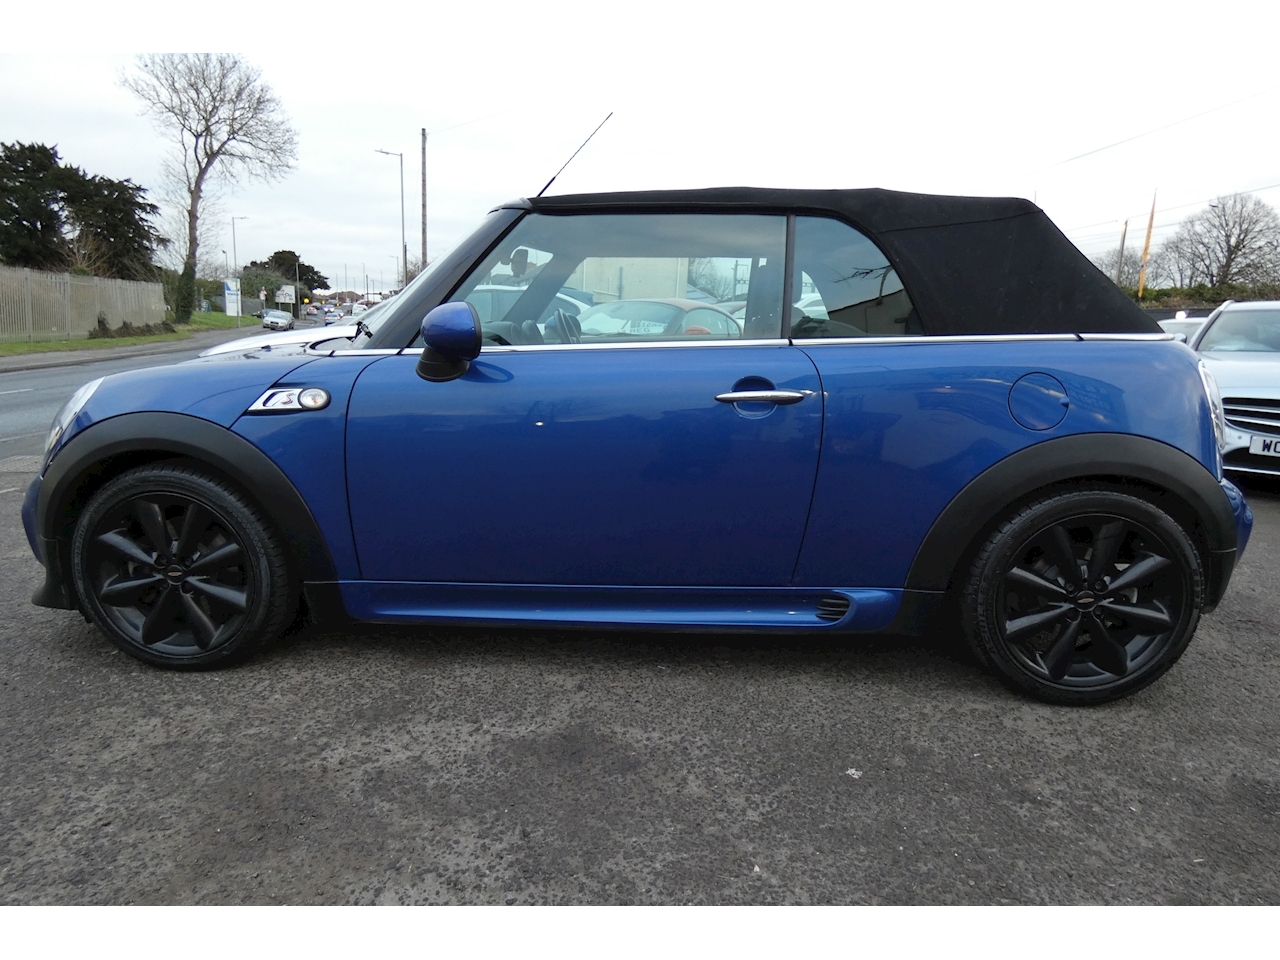 1.6 Cooper S Convertible 2dr Petrol Automatic (153 g/km, 190 bhp)